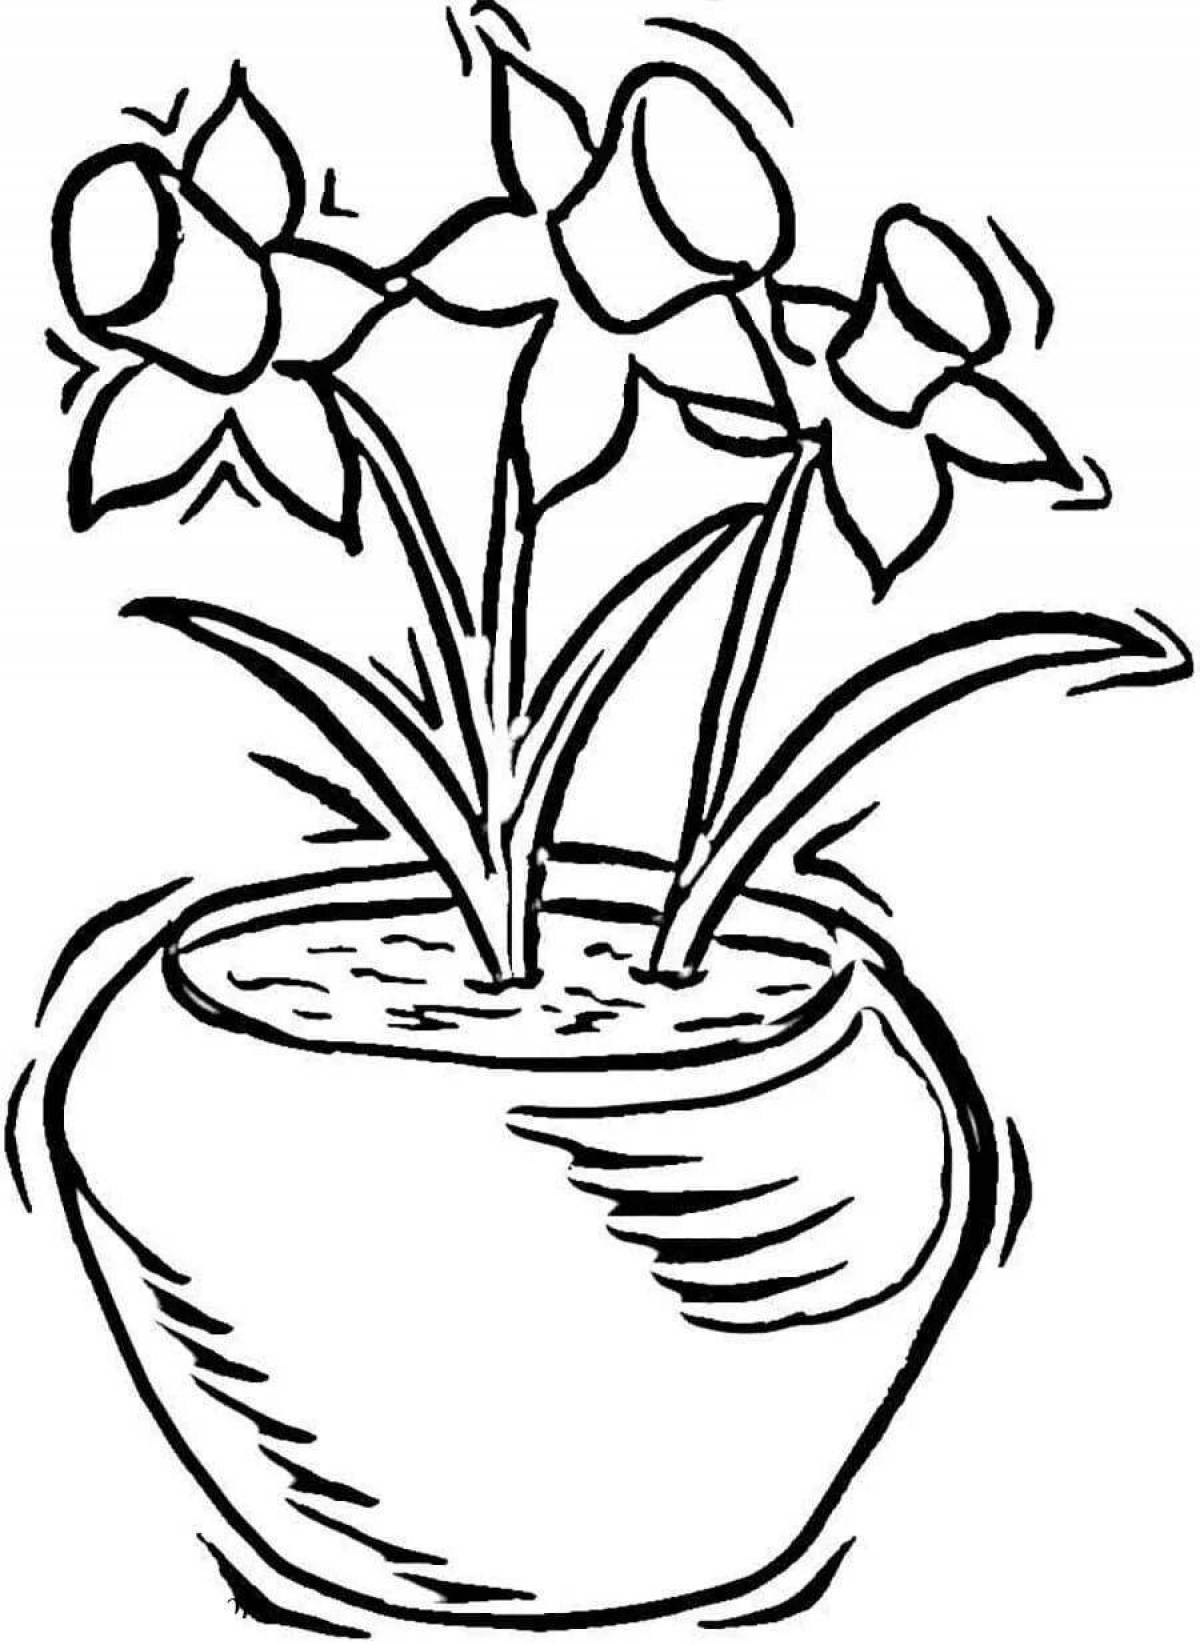 Blissful coloring flower in a pot